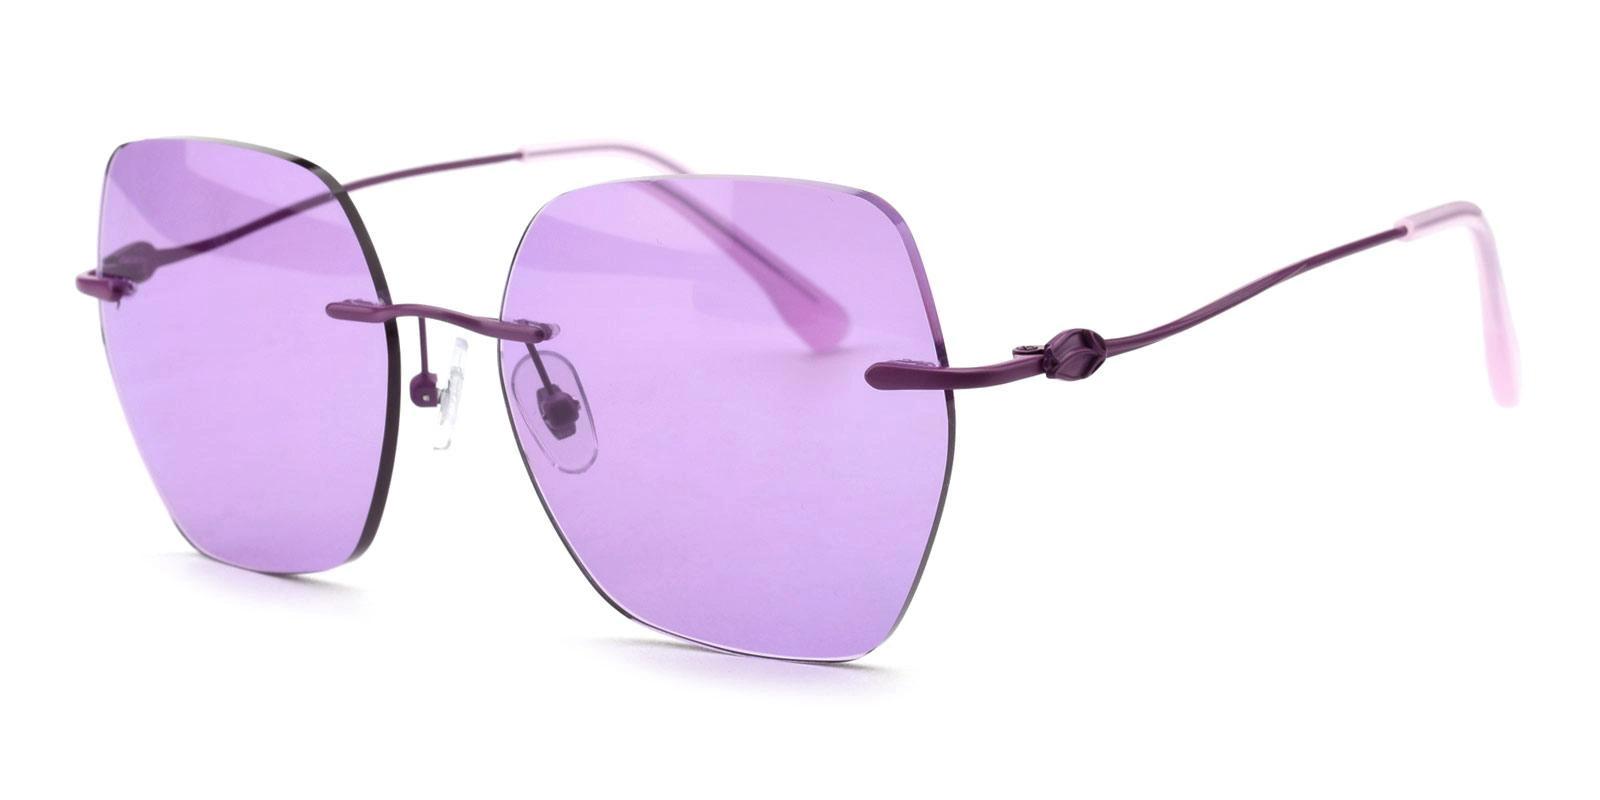 Wantory Purple Metal Sunglasses , NosePads Frames from ABBE Glasses